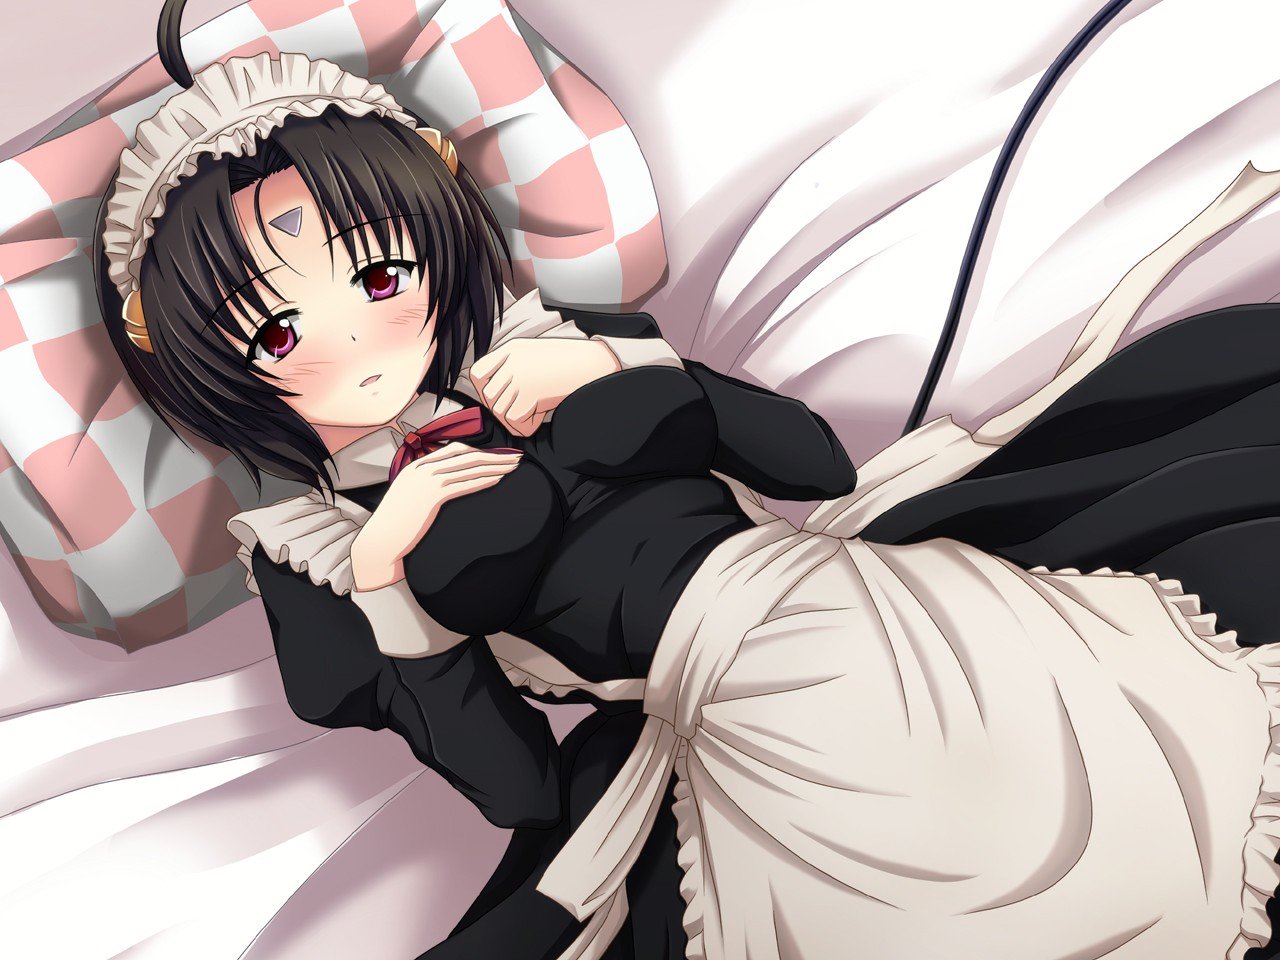 red eyes, Maid outfit, Black hair, Anime Wallpaper